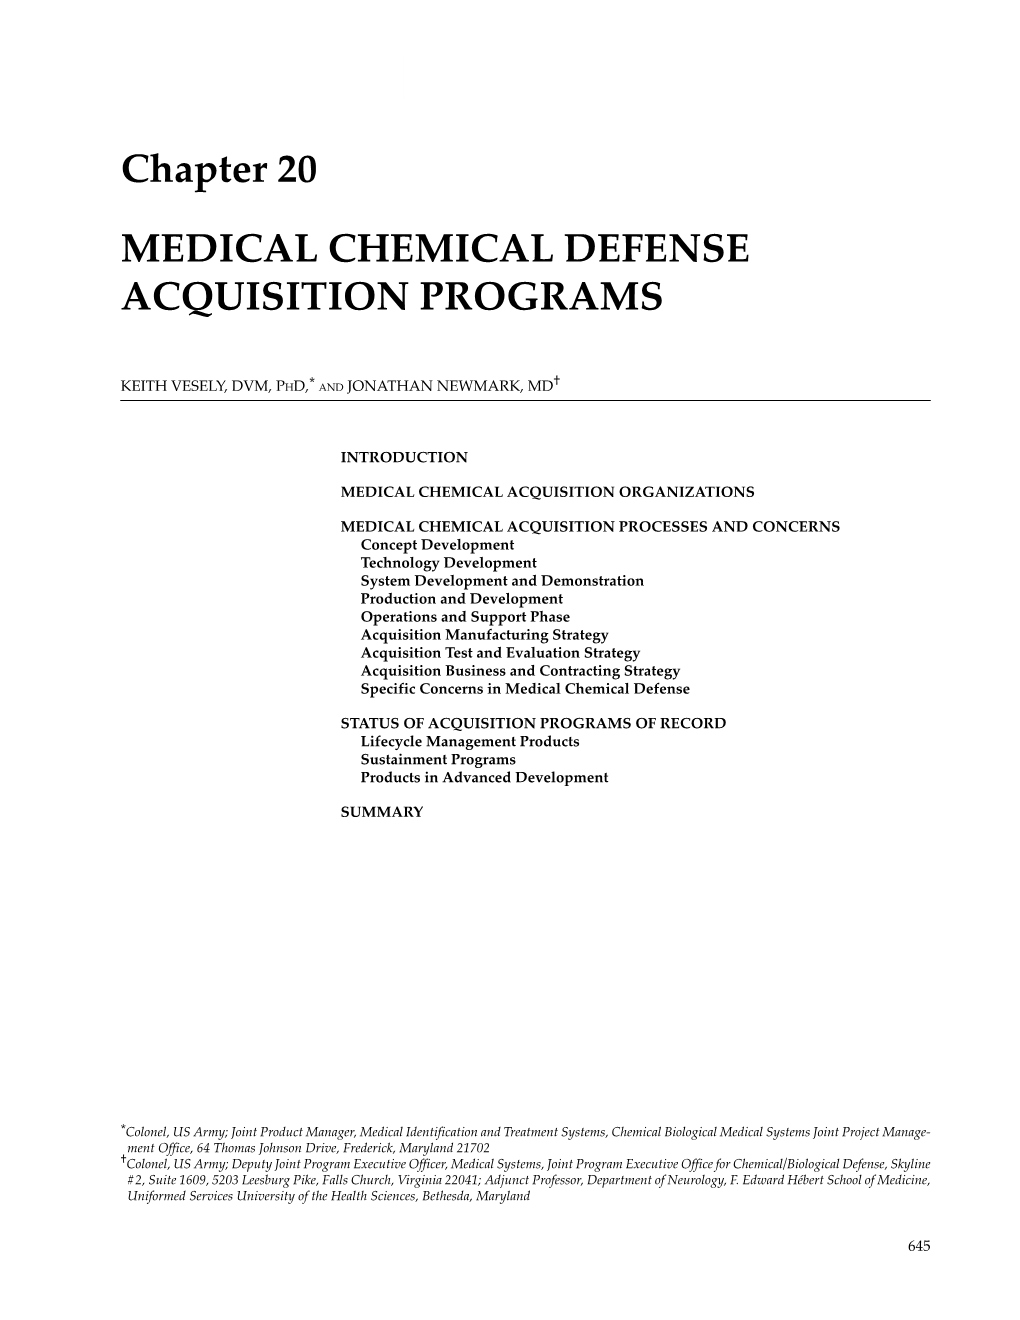 Medical Aspects of Chemical Warfare